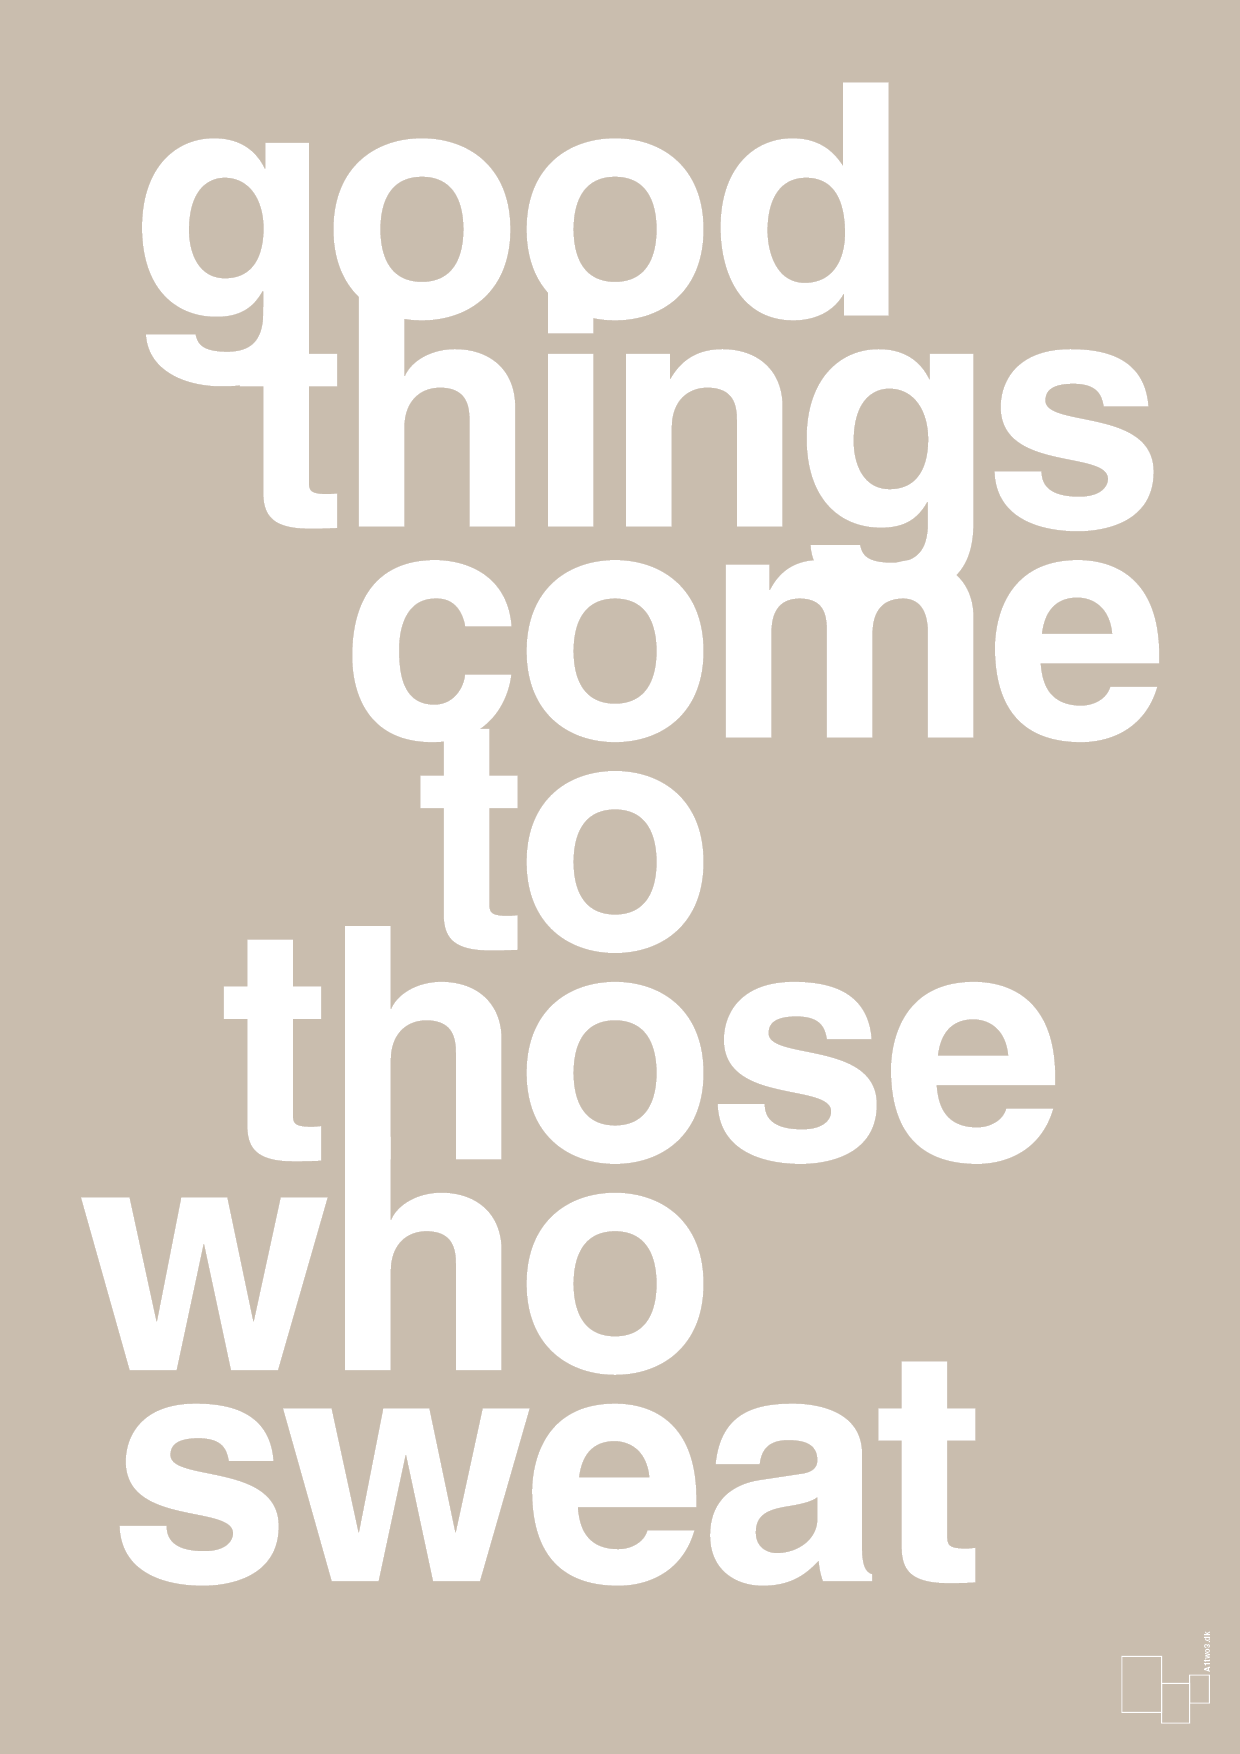 good things come to those who sweat - Plakat med Sport & Fritid i Creamy Mushroom